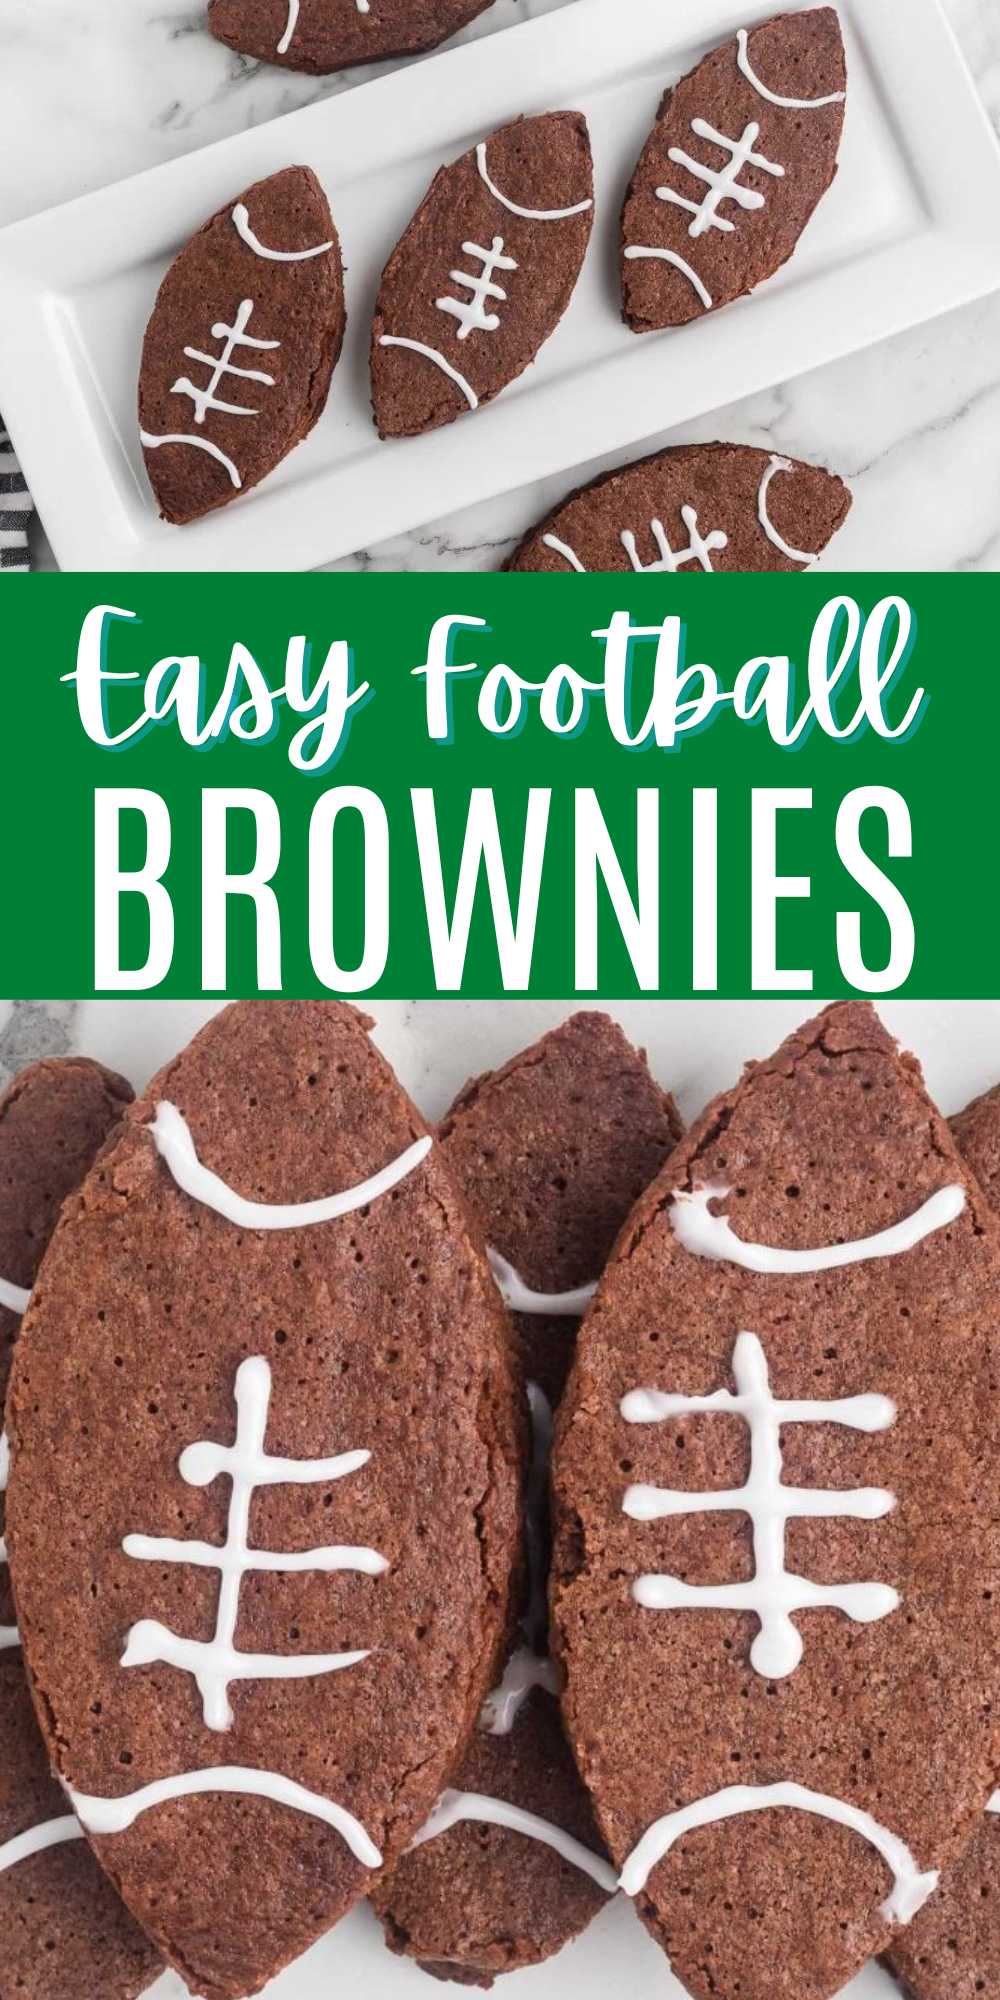 If you are looking for the perfect game day dessert, make Football Brownies. These brownies are perfect your next Super Bowl Party. Everyone will love the special touch of serving these brownies for the big game. Impress your guests this football season with these game day brownies. #eatingonadime #footballbrownies #footballdesserts #gameday